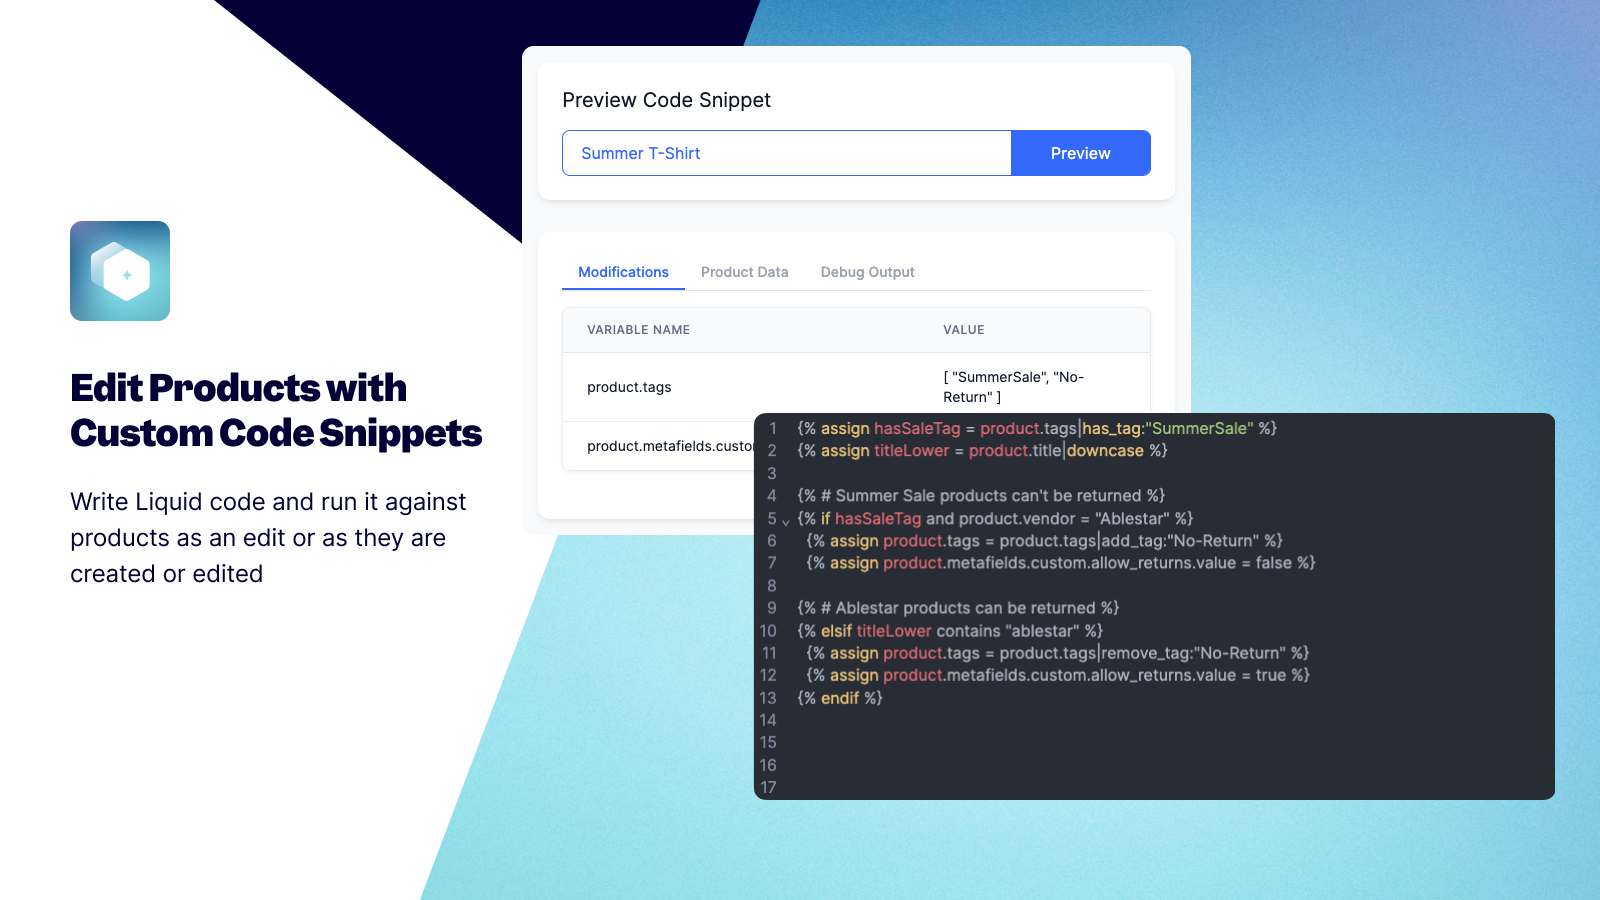 Bulk edit your products with Liquid code snippets